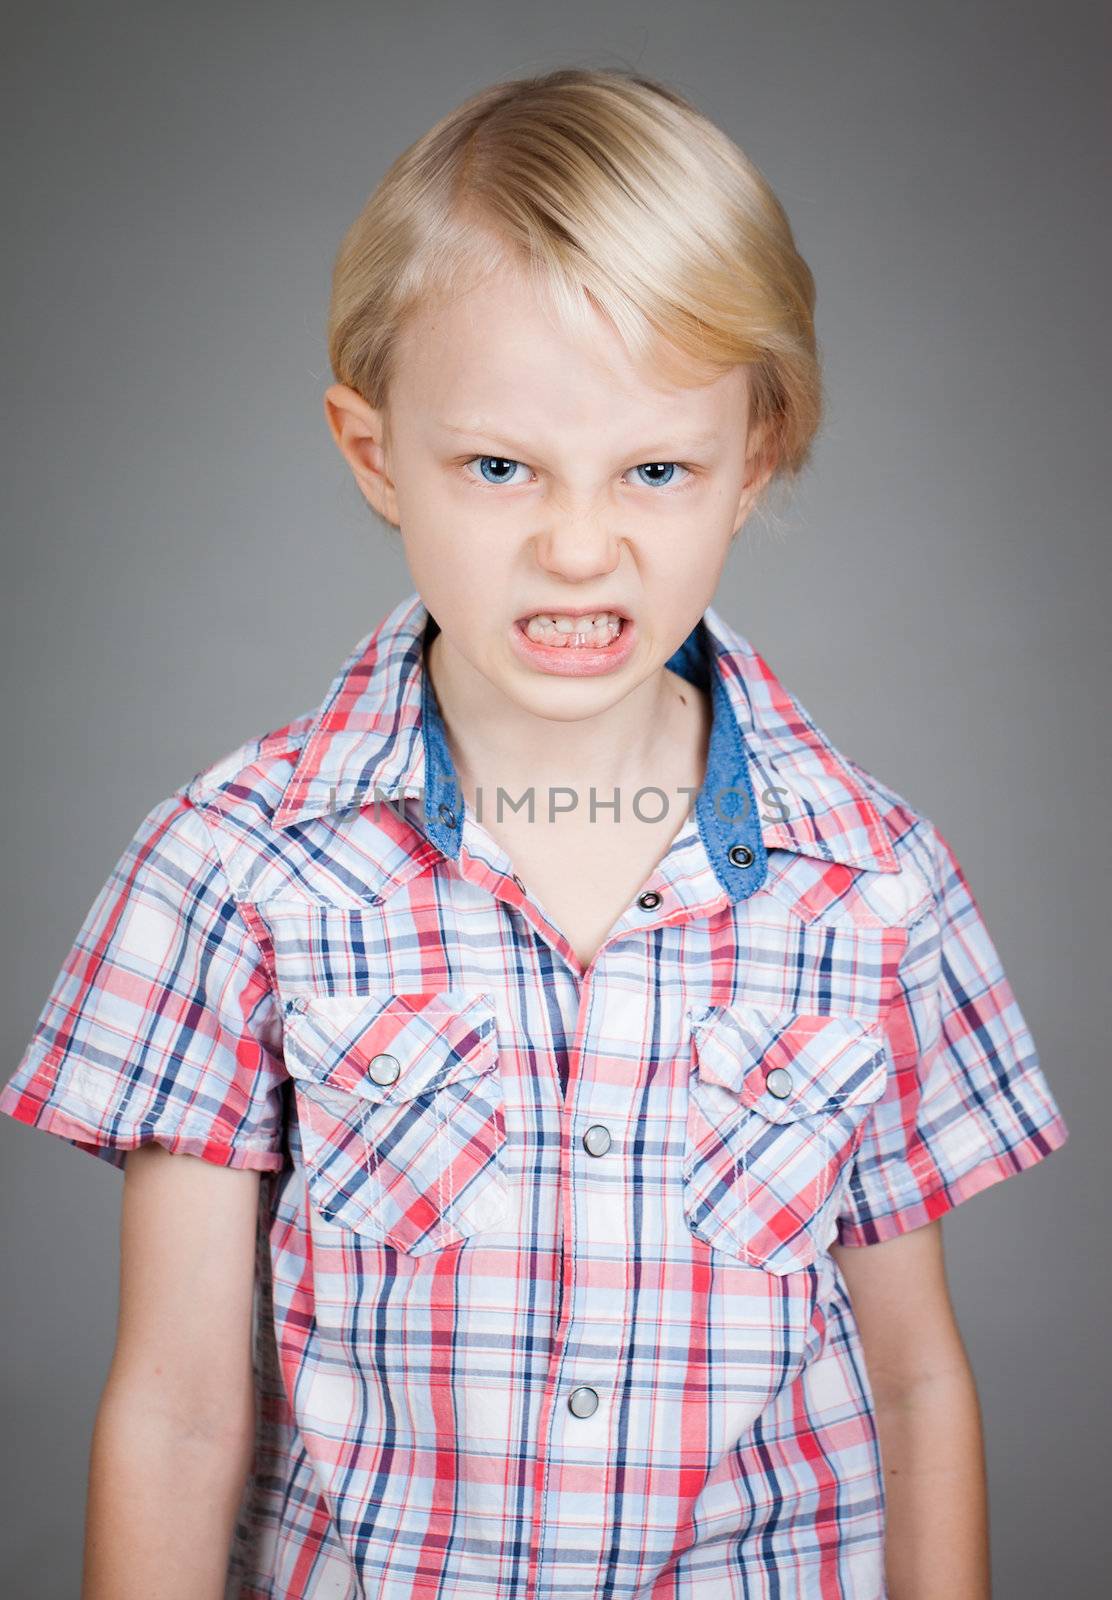 A frustrated and angry looking young boy  pulling a face. Isolated on white.